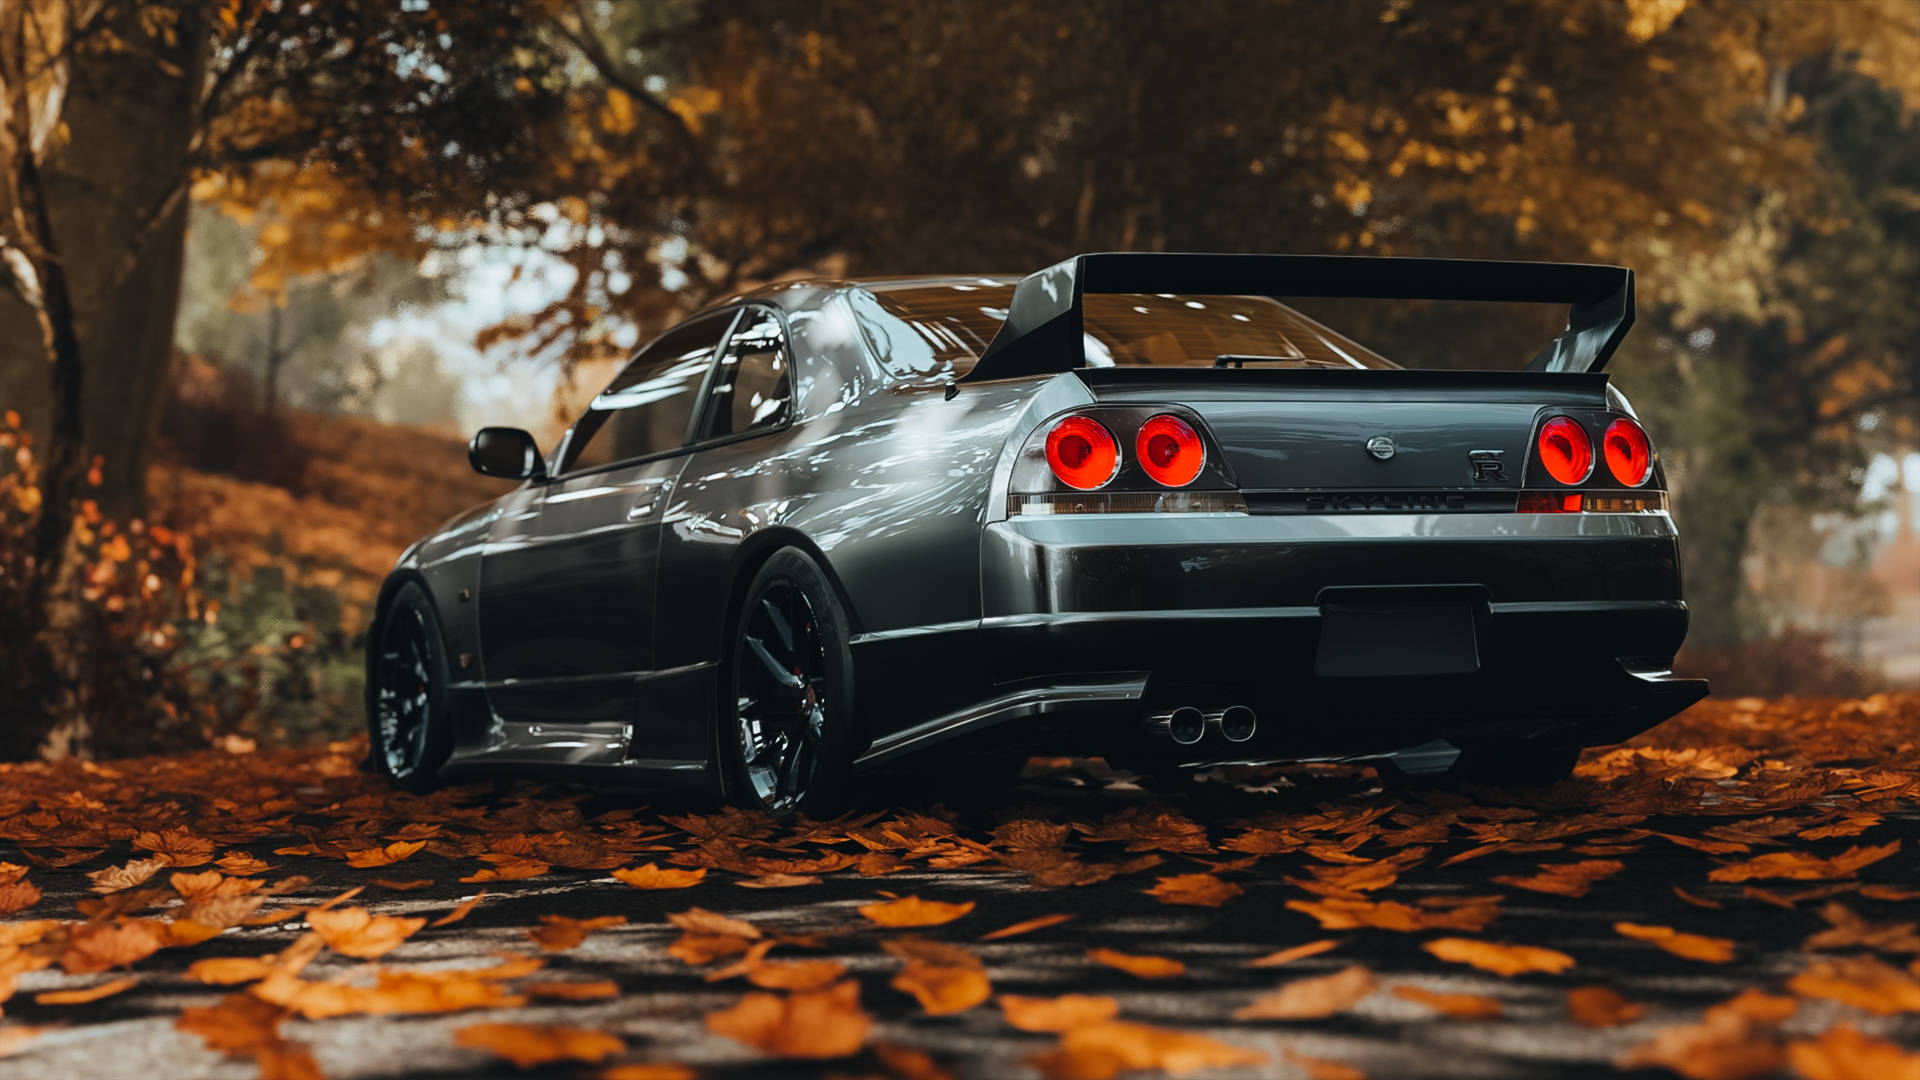 Jdm Cars With Autumn Leaves Wallpaper